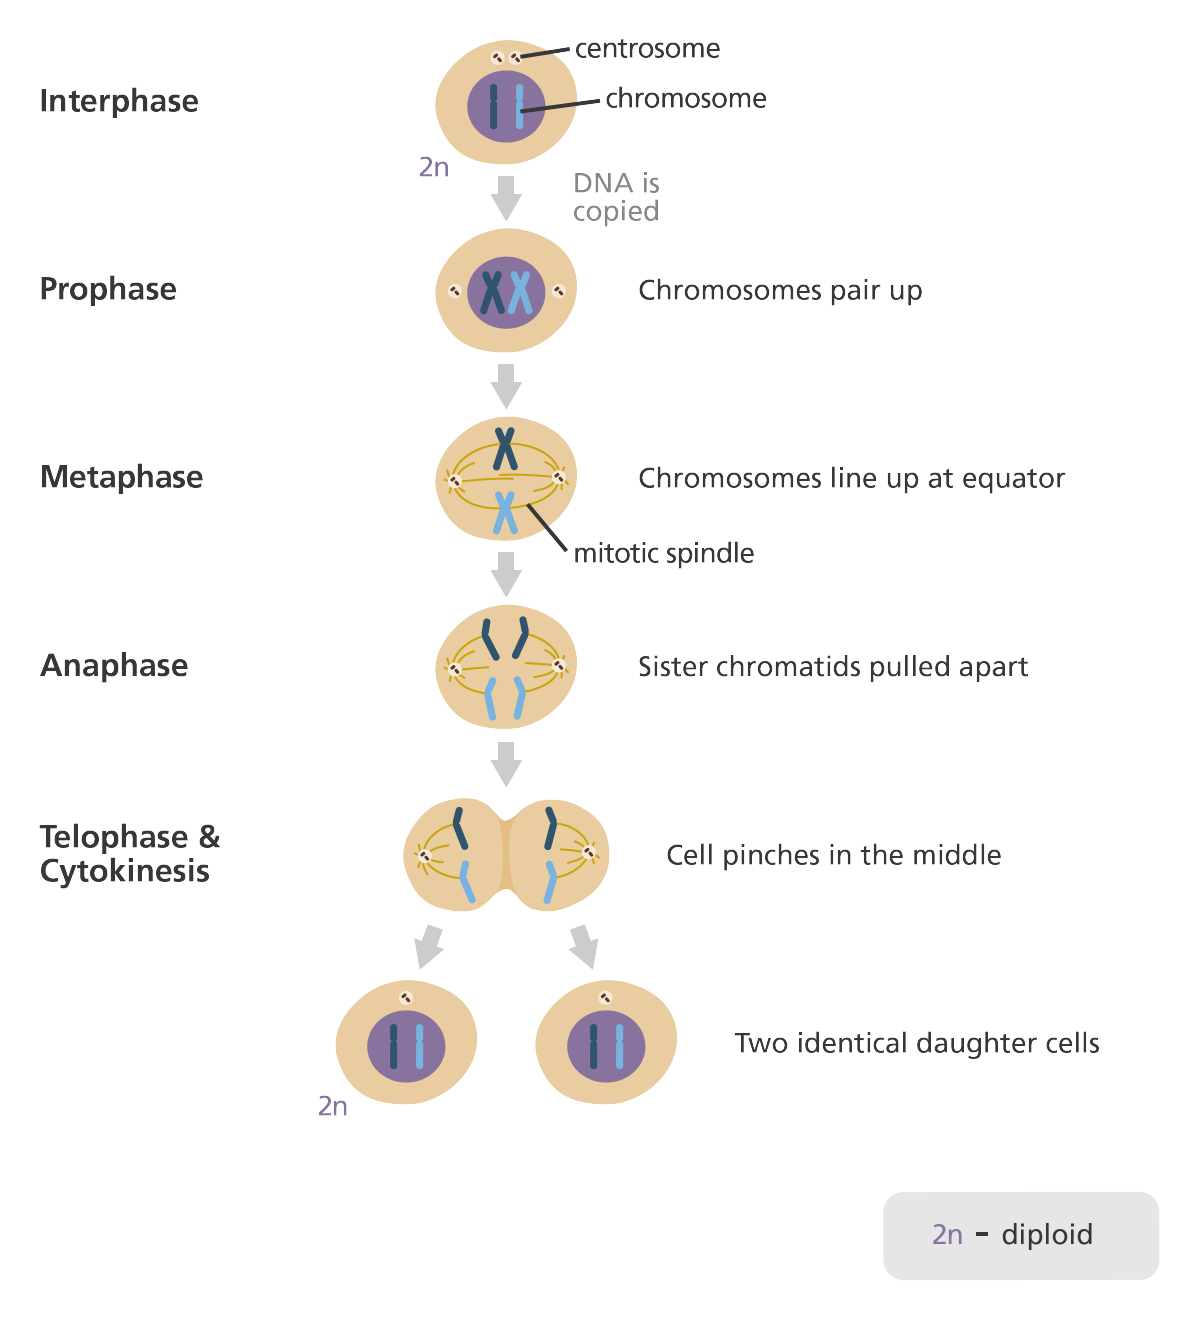 <ol><li><p>every body cell needs same number of chromosomes so cell duplicates all of the organelles before division</p></li><li><p>the chromosomes are pulled to the edge of the cell and the nucleus divides</p></li><li><p>cytoplasm and cell membrane divides</p></li></ol>